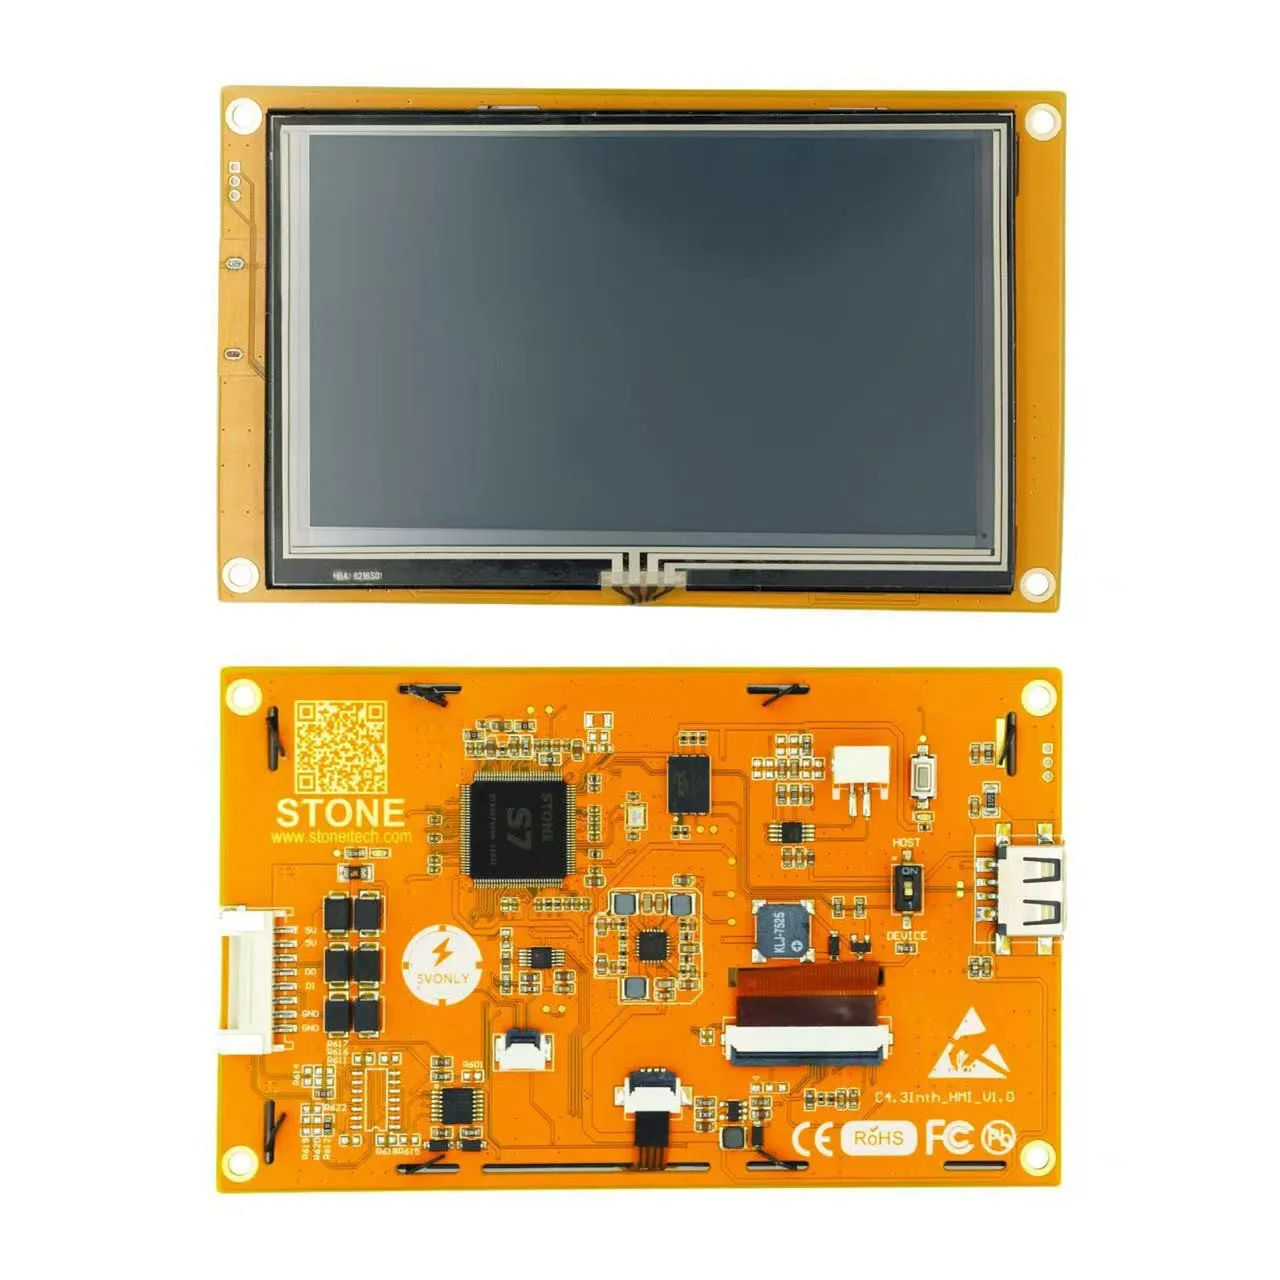 Stone 4.3 TFT monitor driver 128MB of flash memory for HMI projects, 1G Hz Cortex A8 CPU, and 262k true-to-life colors View